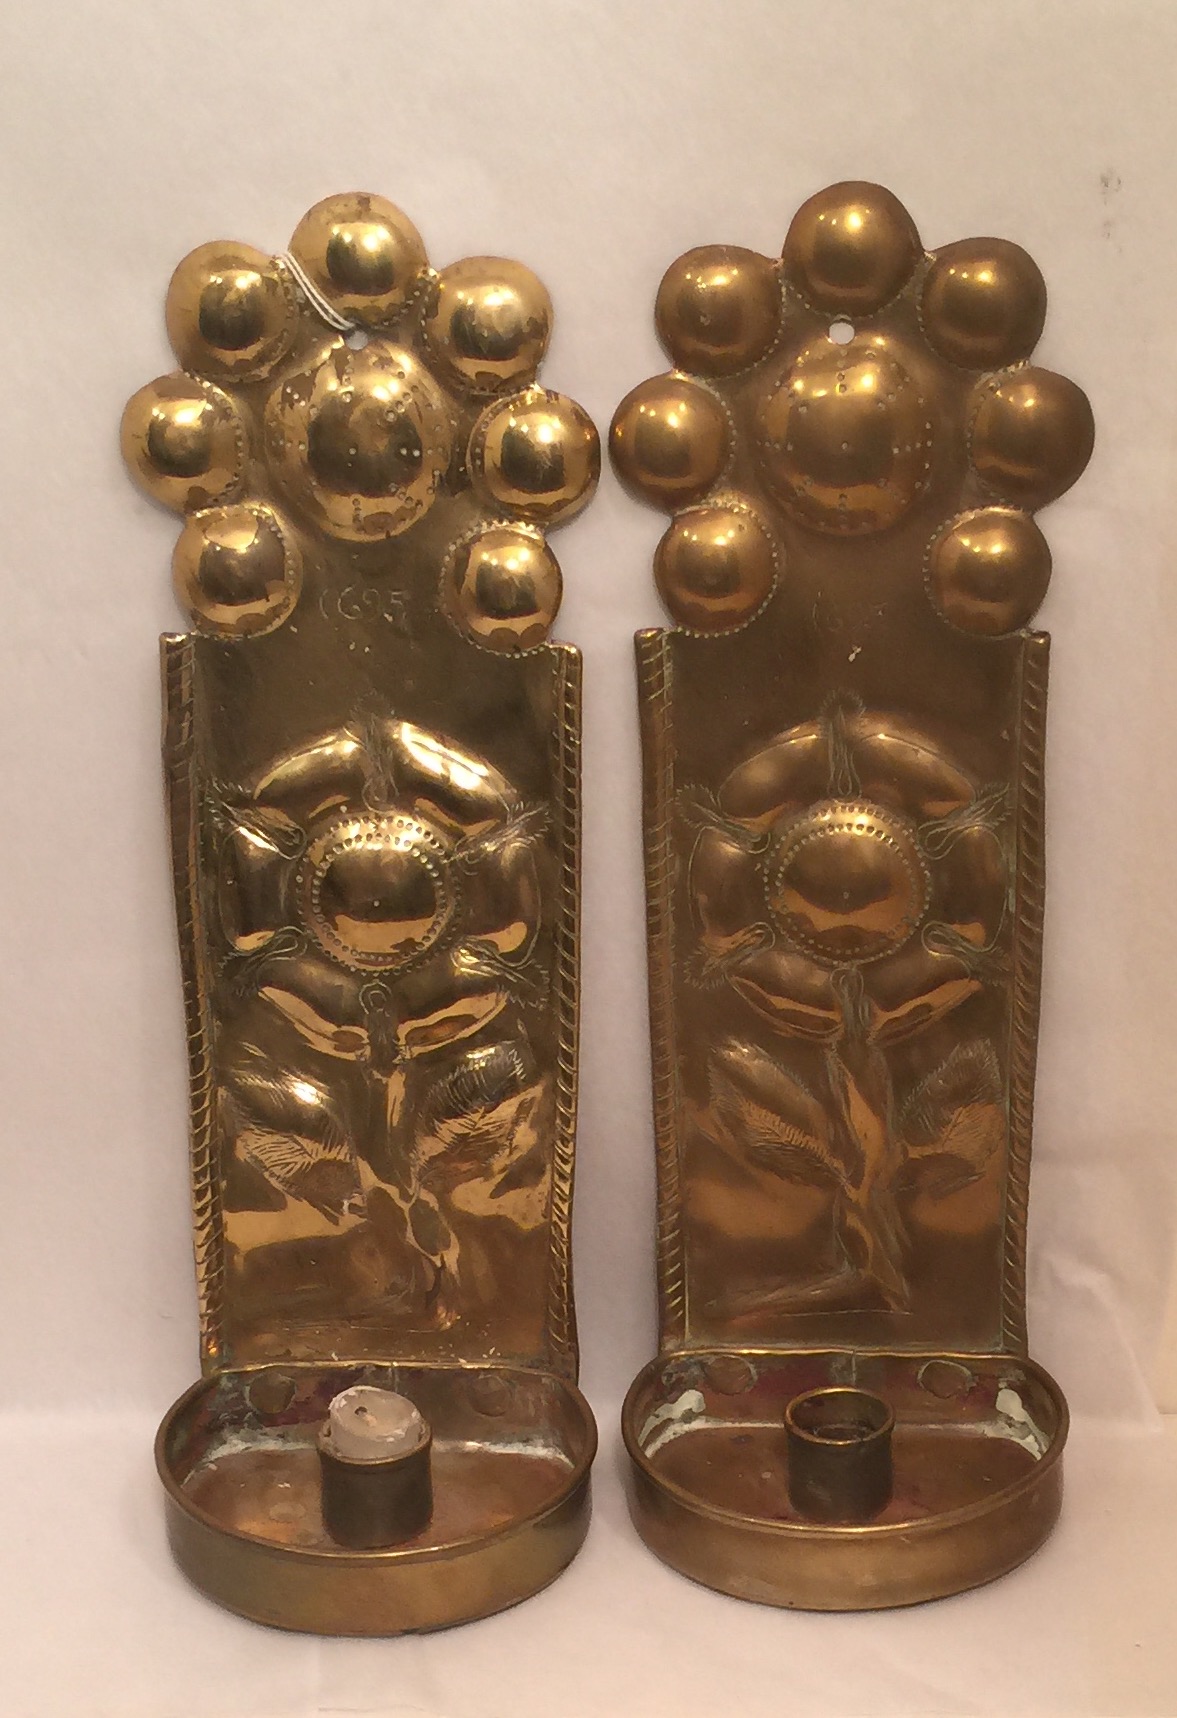 A PAIR OF HEAVY BRASS WALL SCONCES With floral repoussé decoration and dated 1695. (9cm x 30cm x